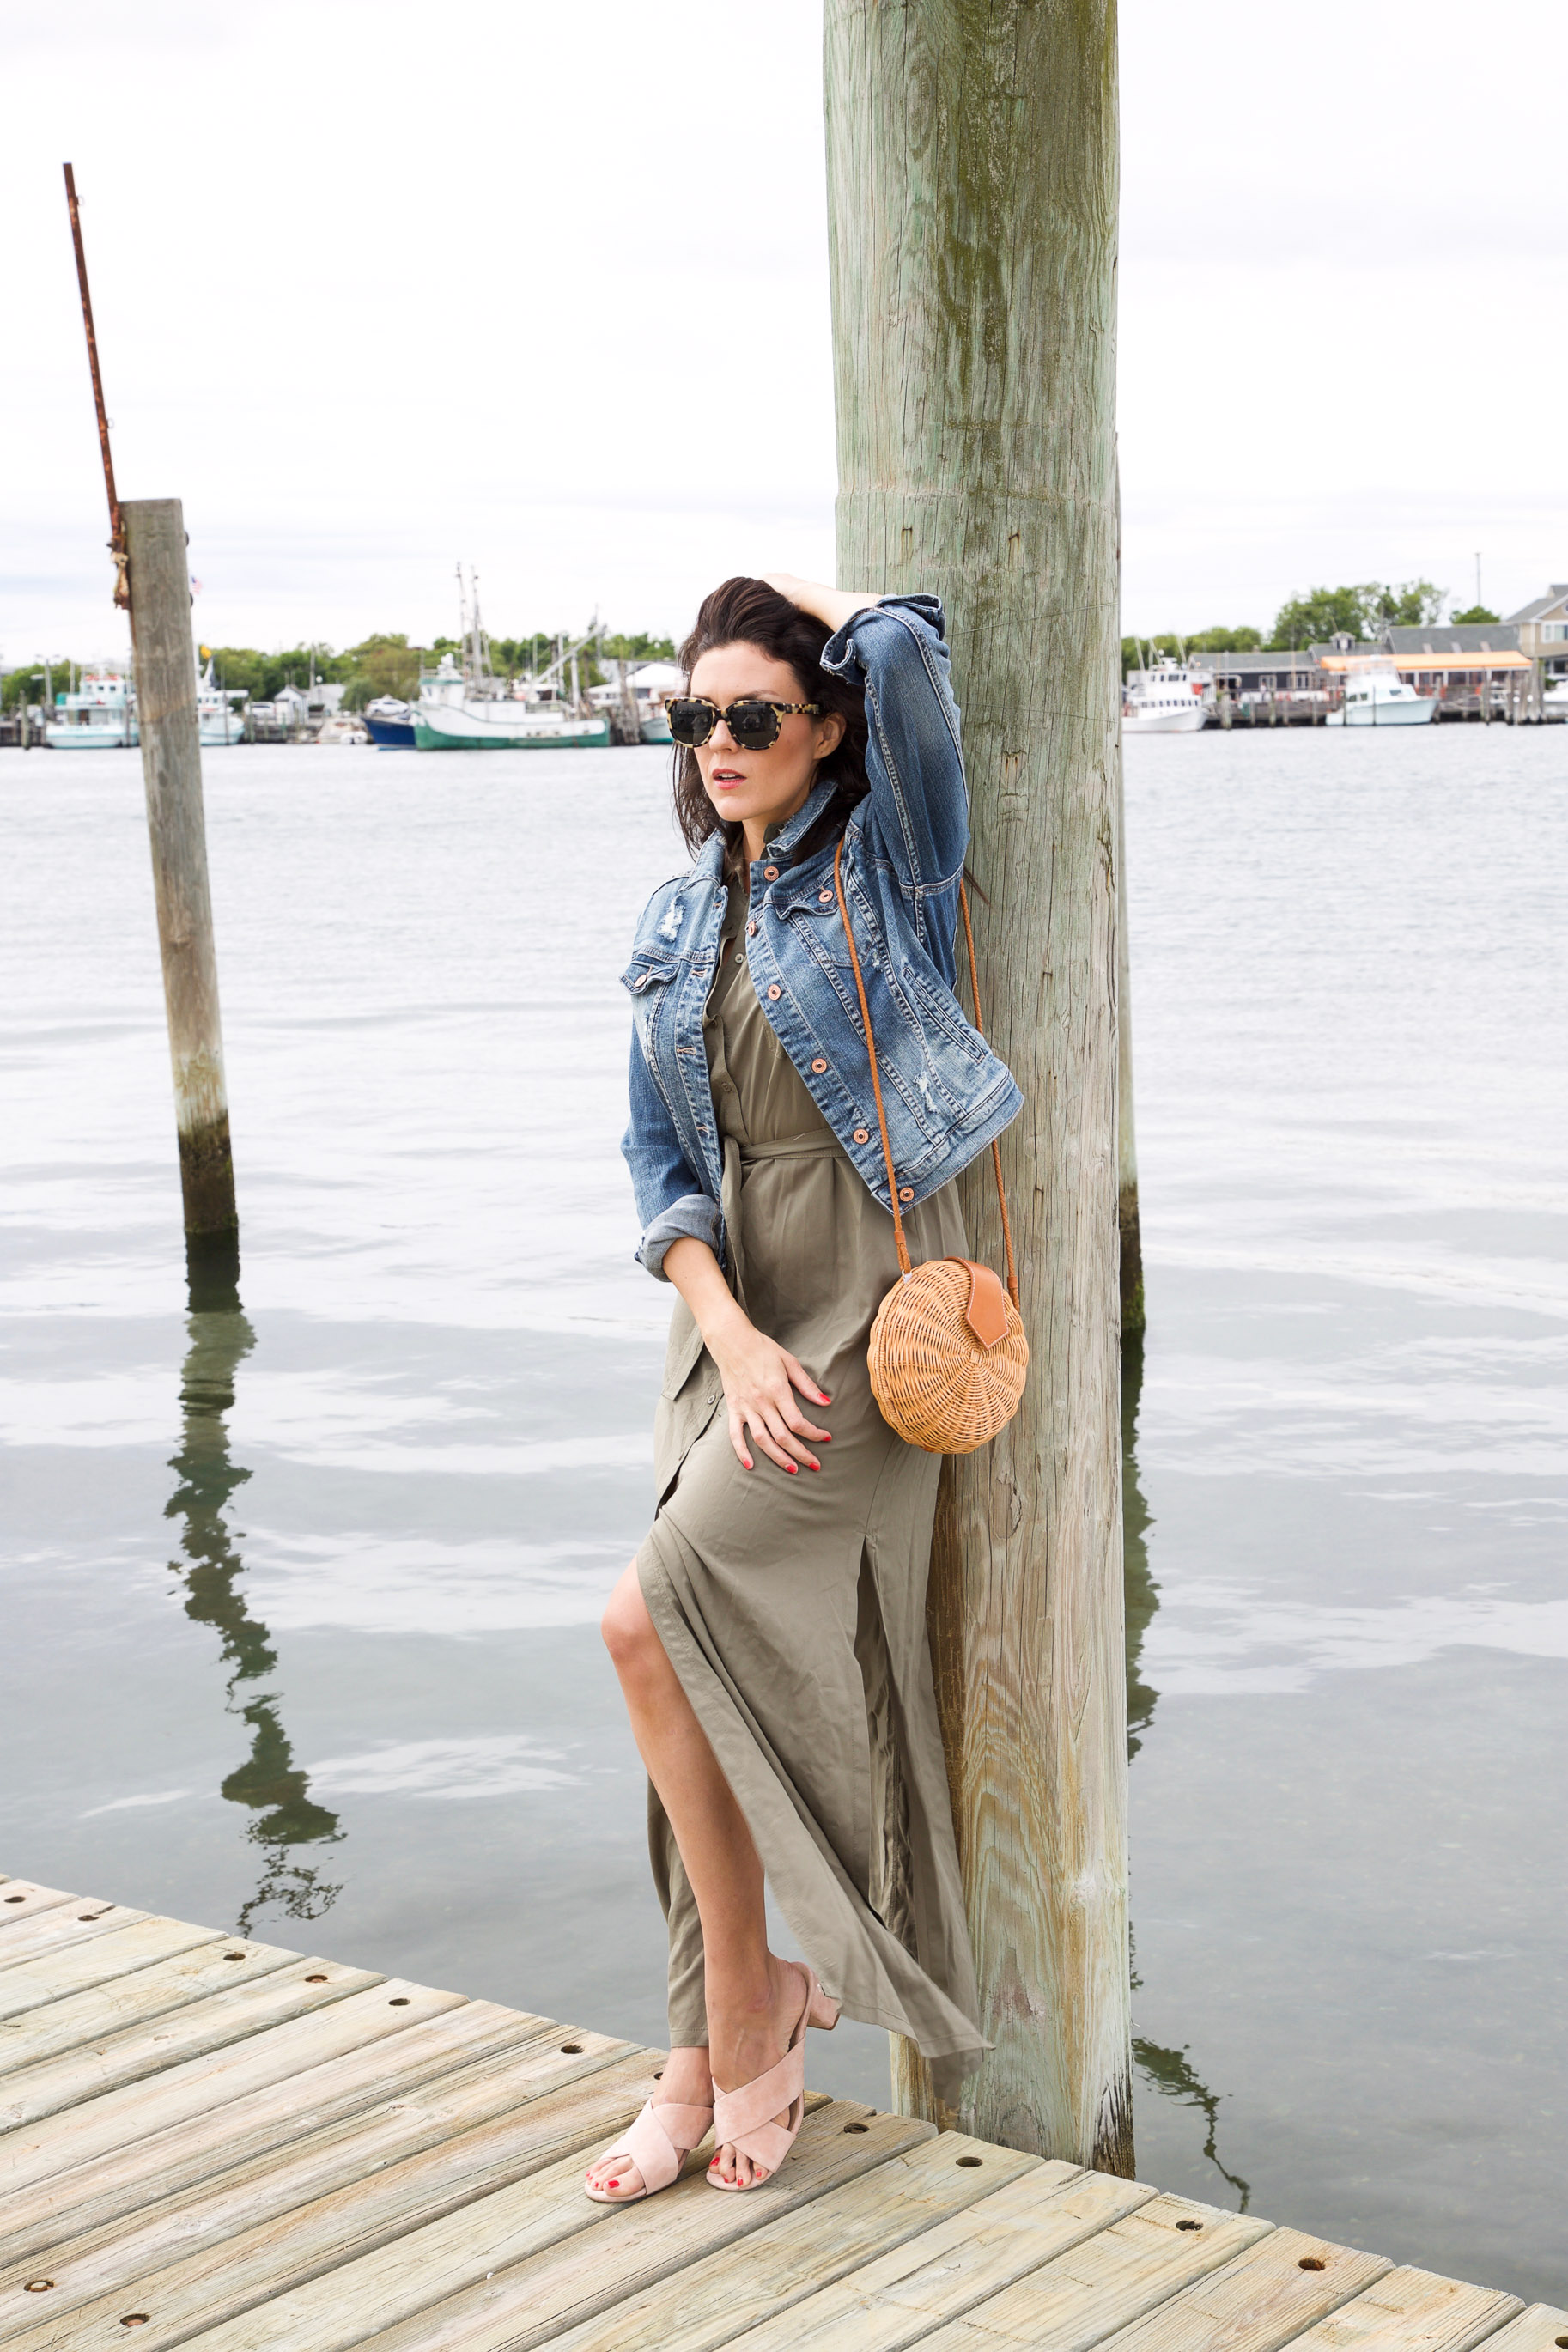 OOTD+LINK UP: Striped maxi dress and denim jacket - Beauty by Miss L